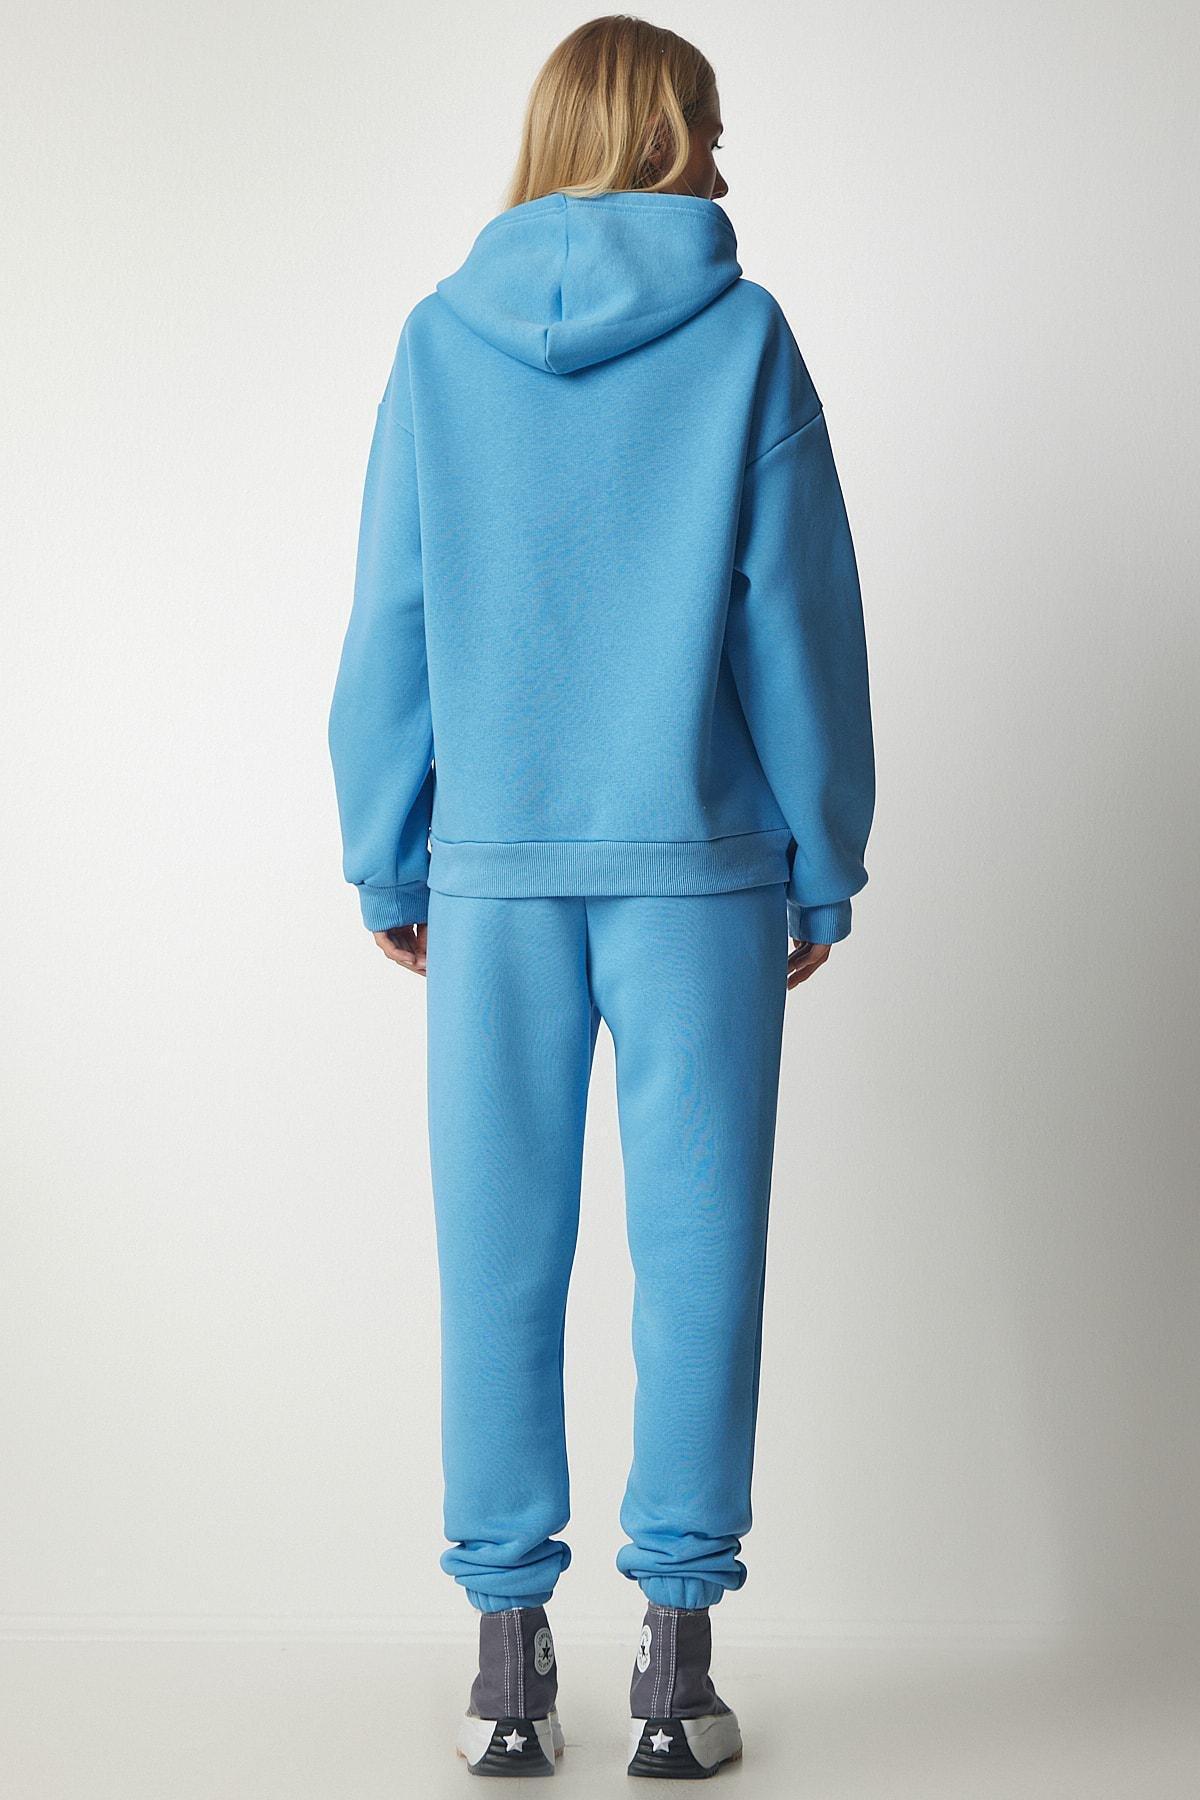 Happiness Istanbul - Blue Hooded Raspberry Tracksuit Set